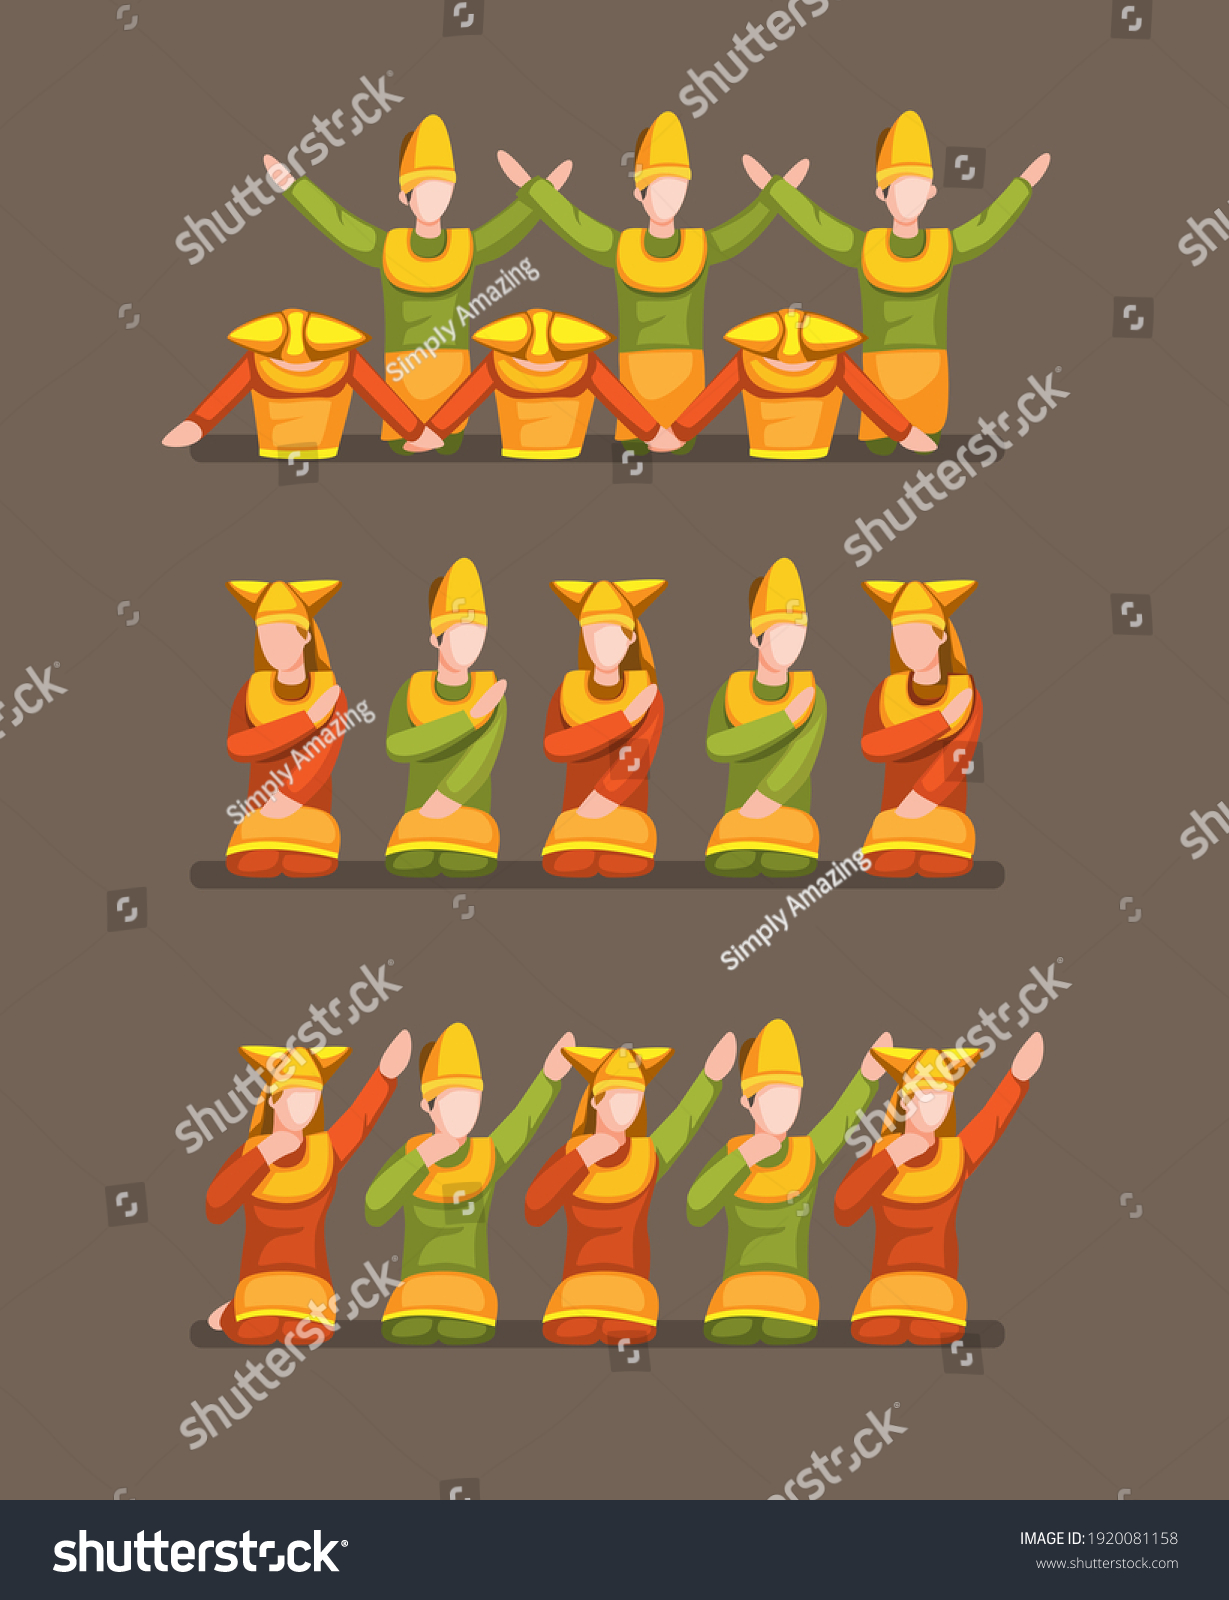 SVG of Indang Dance is a traditional Minangkabau Islamic dance originating from West Sumatra, Indonesia. move pose symbol concept in cartoon illustration vector svg